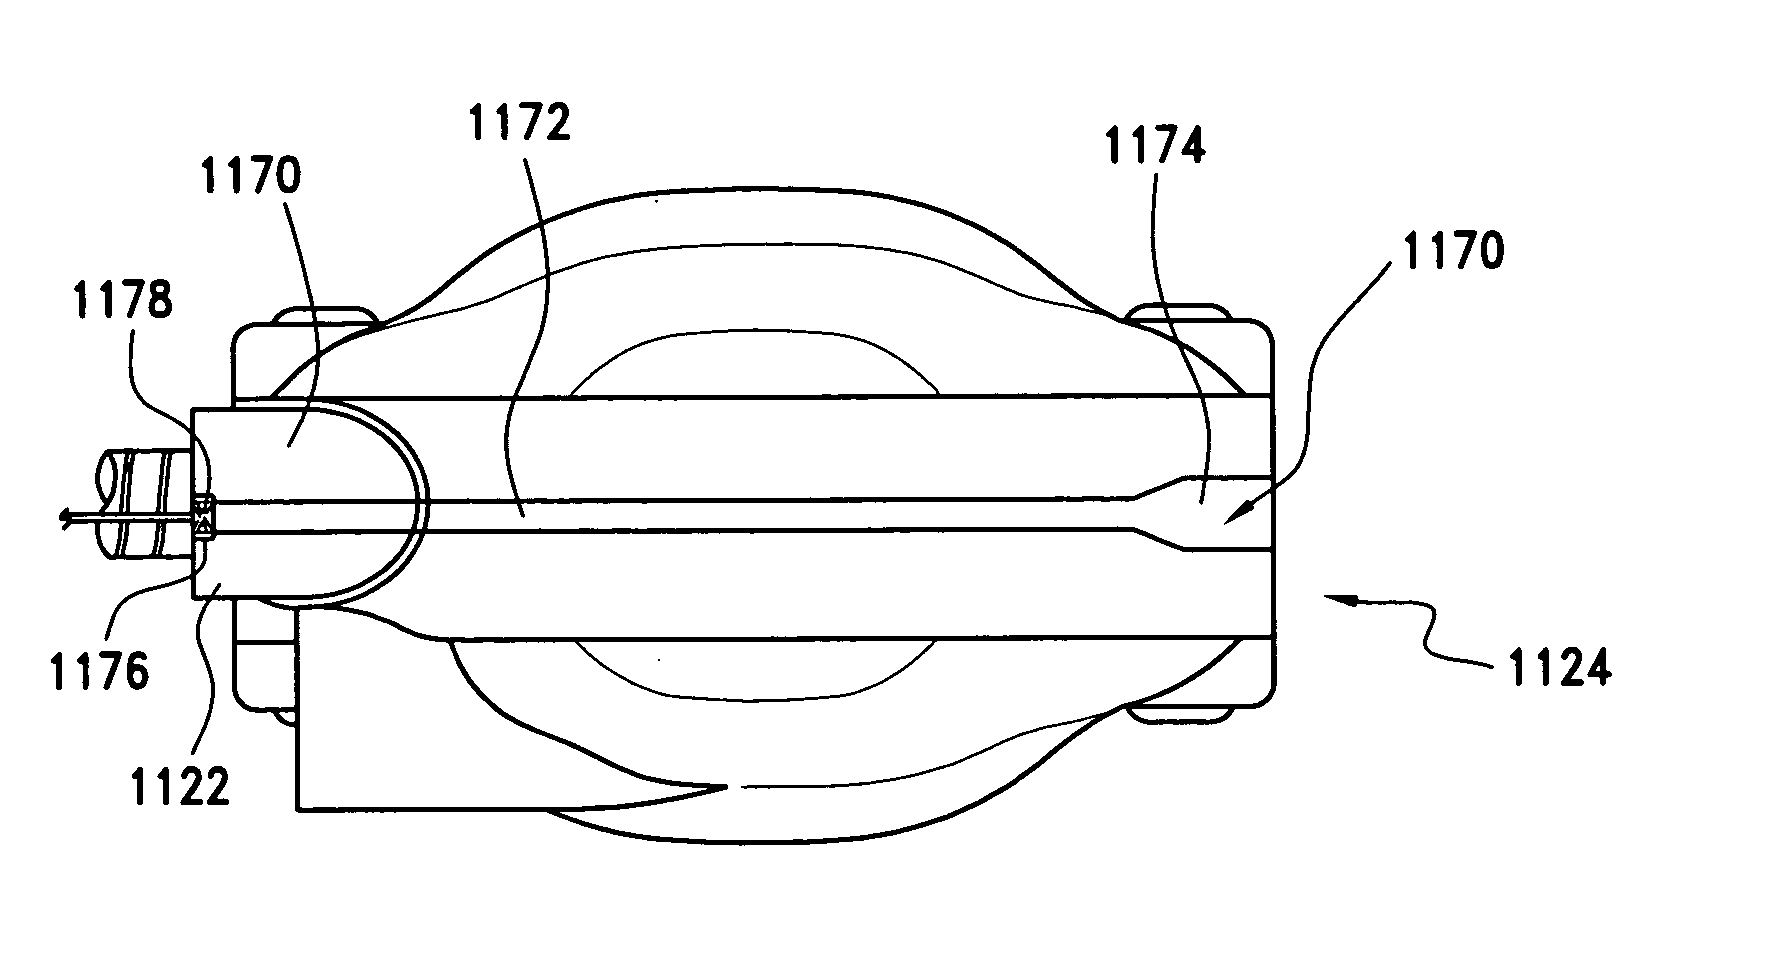 Surgical suturing apparatus with a non-visible spectrum sensing member